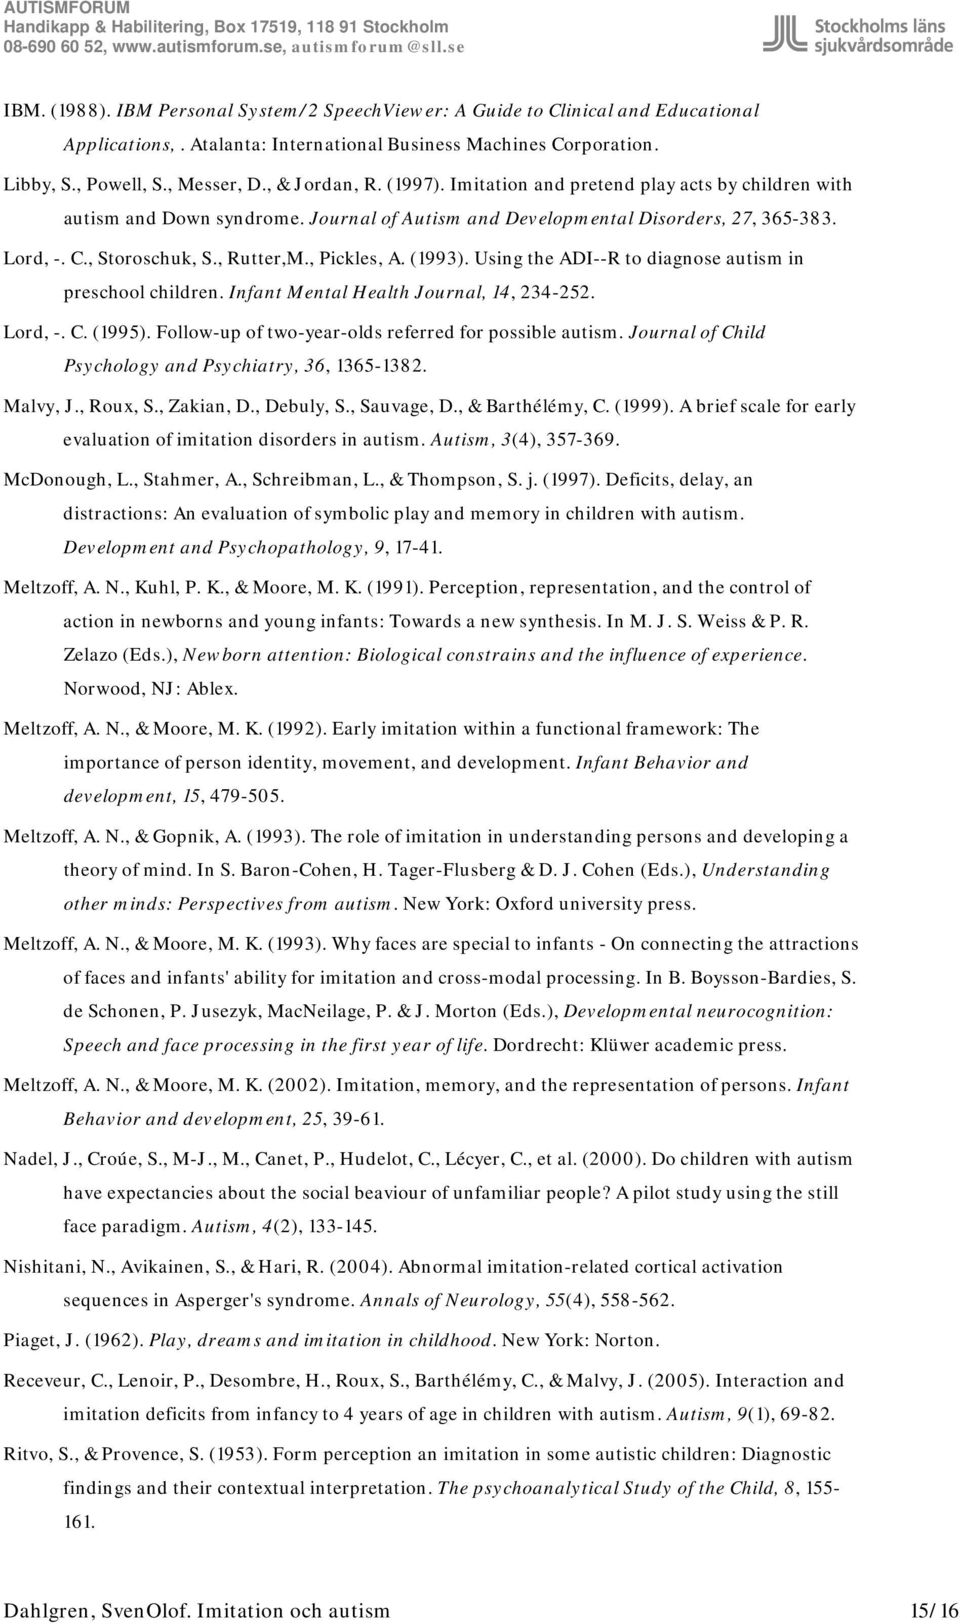 , Pickles, A. (1993). Using the ADI--R to diagnose autism in preschool children. Infant Mental Health Journal, 14, 234-252. Lord, -. C. (1995). Follow-up of two-year-olds referred for possible autism.